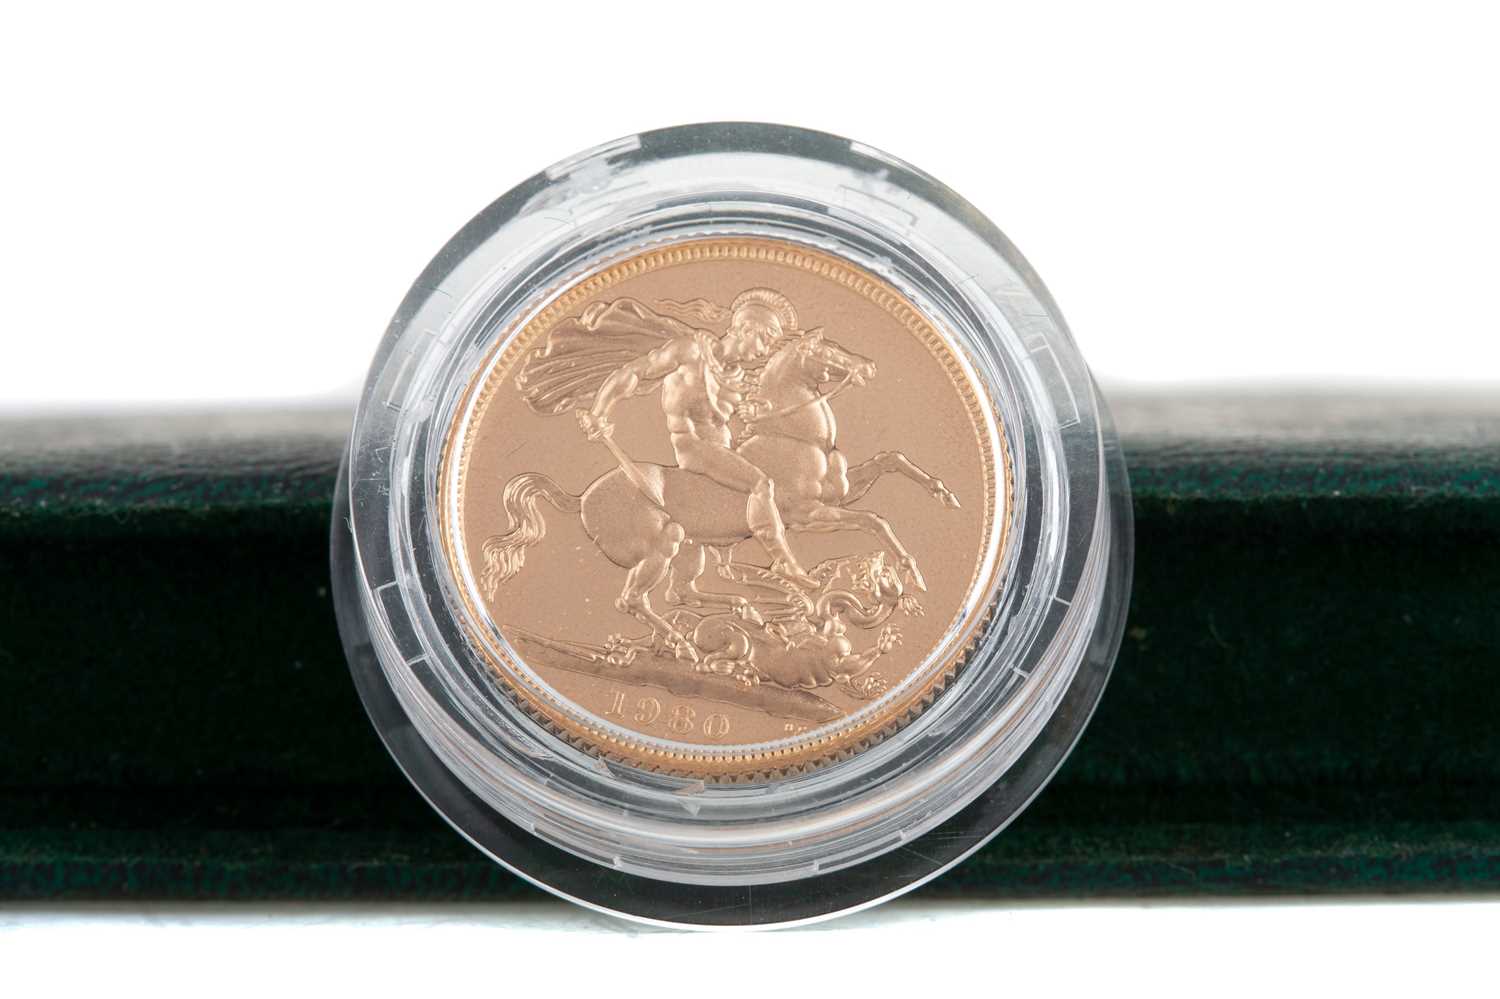 Lot 11 - A GOLD PROOF SOVEREIGN DATED 1980